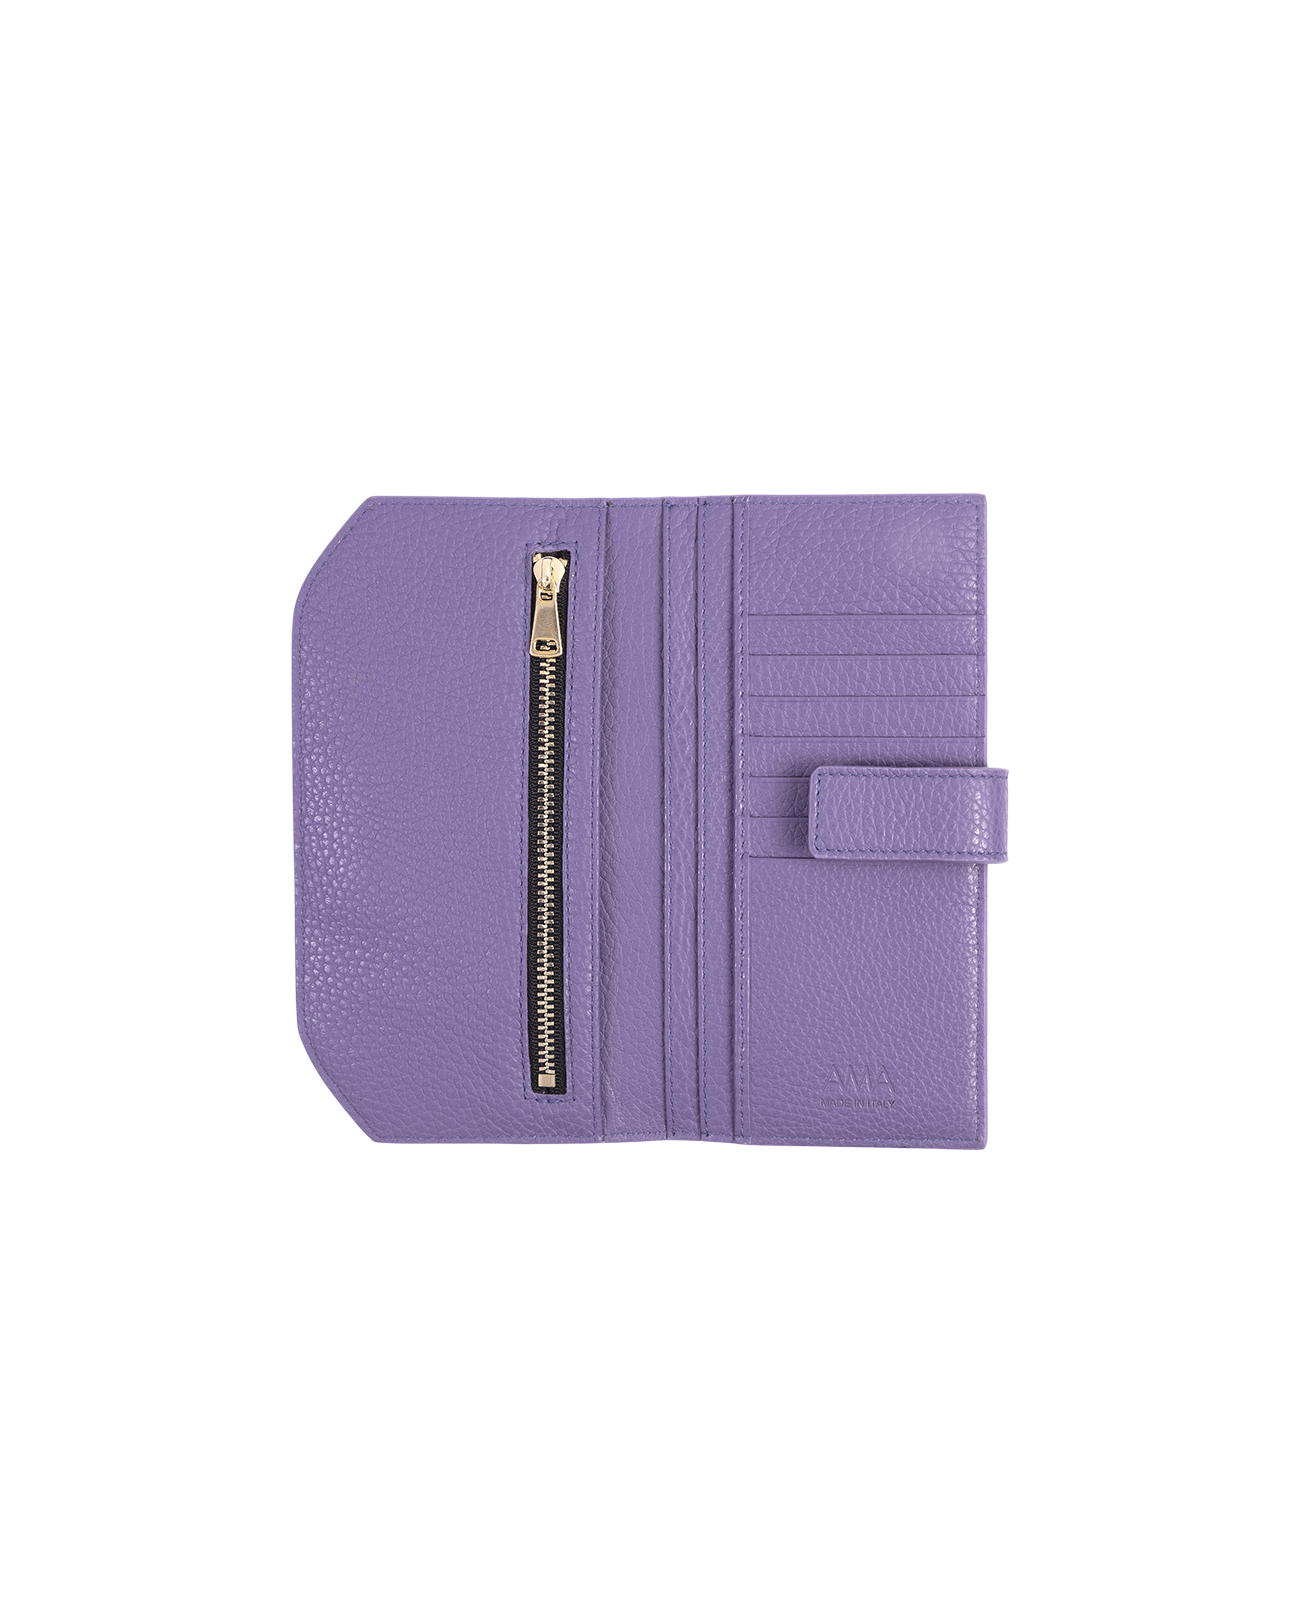 Wallet in Italian full-grain leather. Designed to carry your personal items. Available in a variety of styles and designs. Color: Purple. Size: Medium